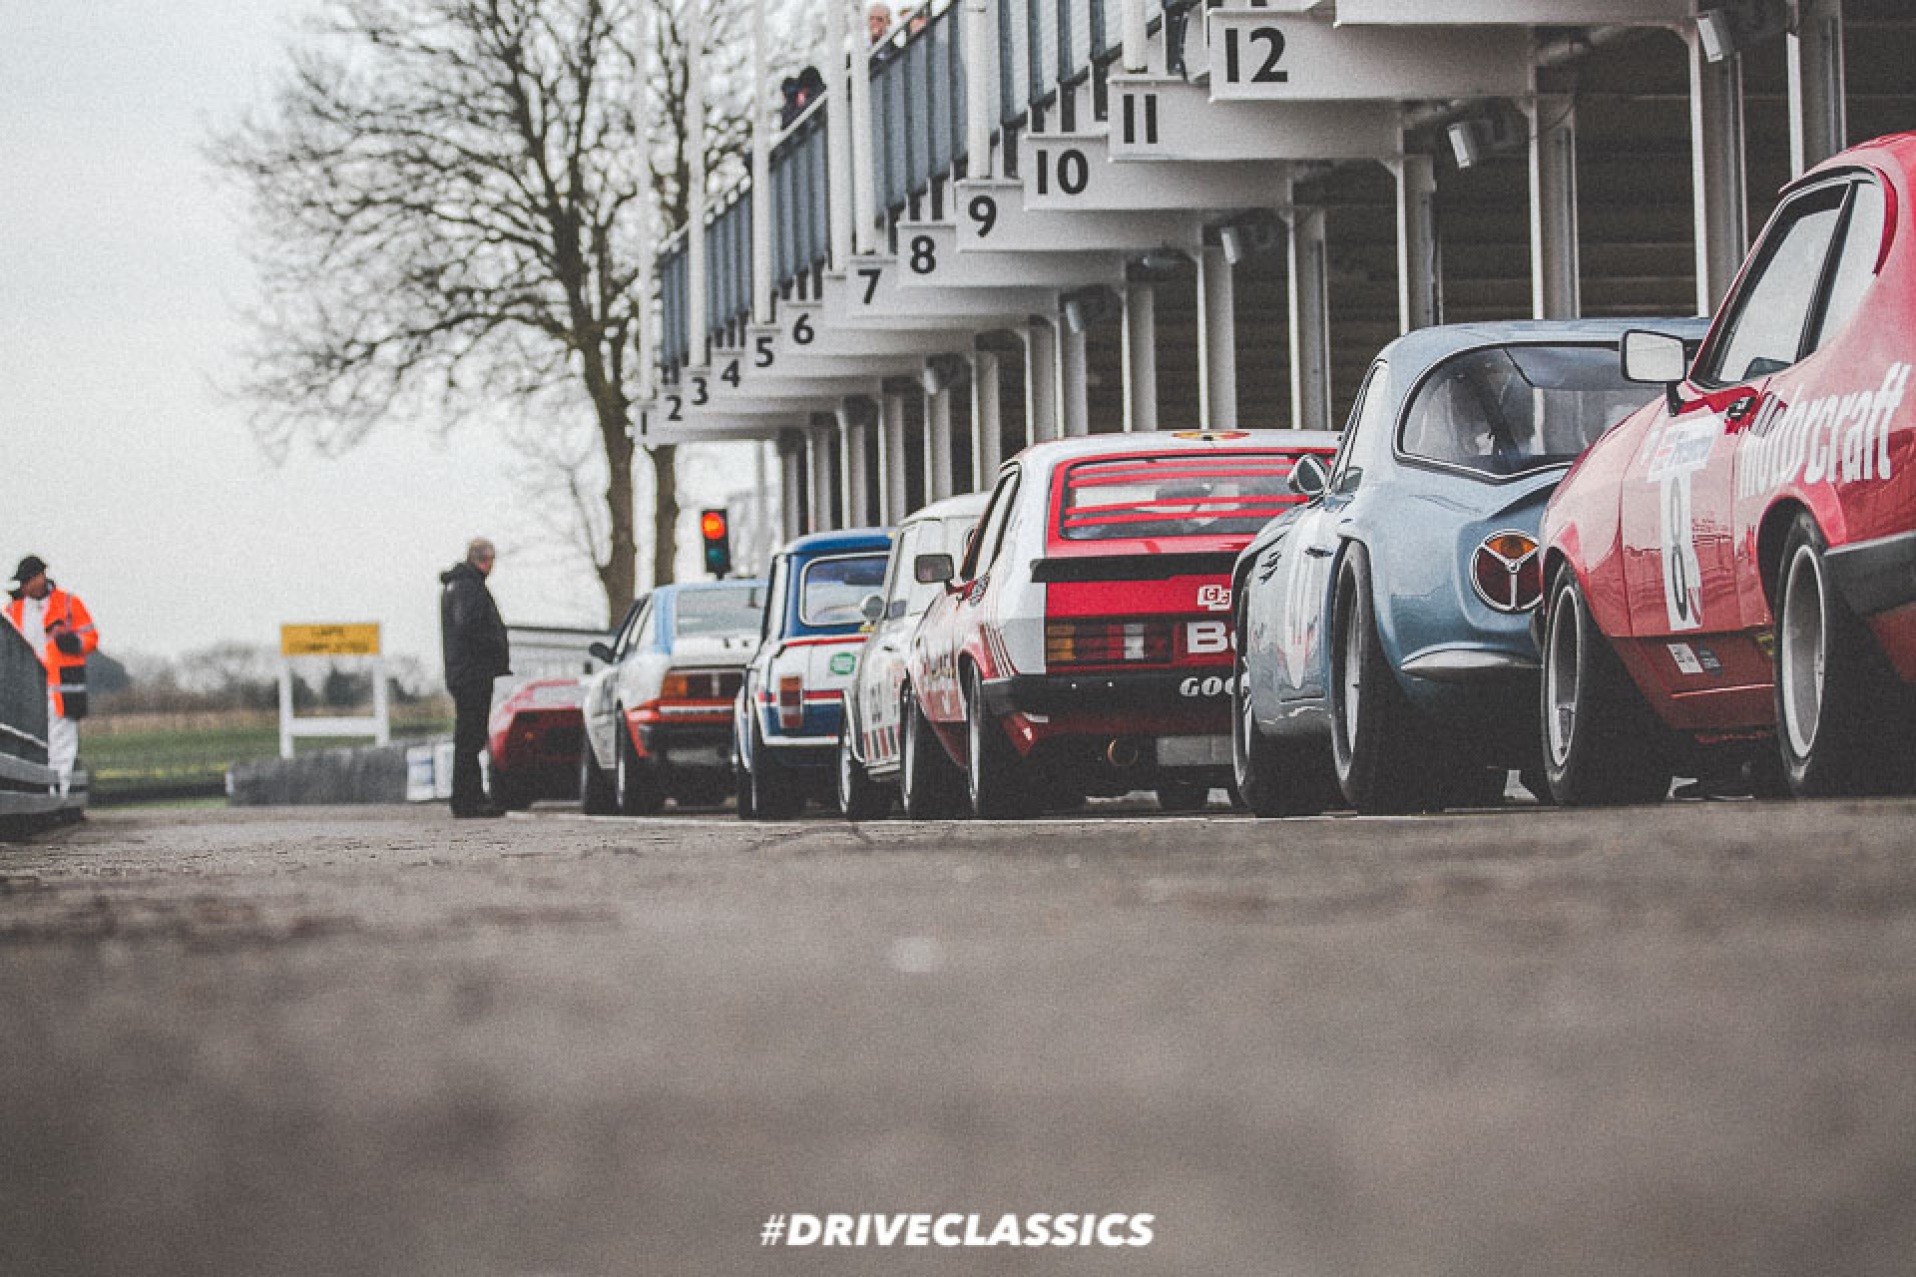 Goodwood Testing Session 2 (158 of 158)